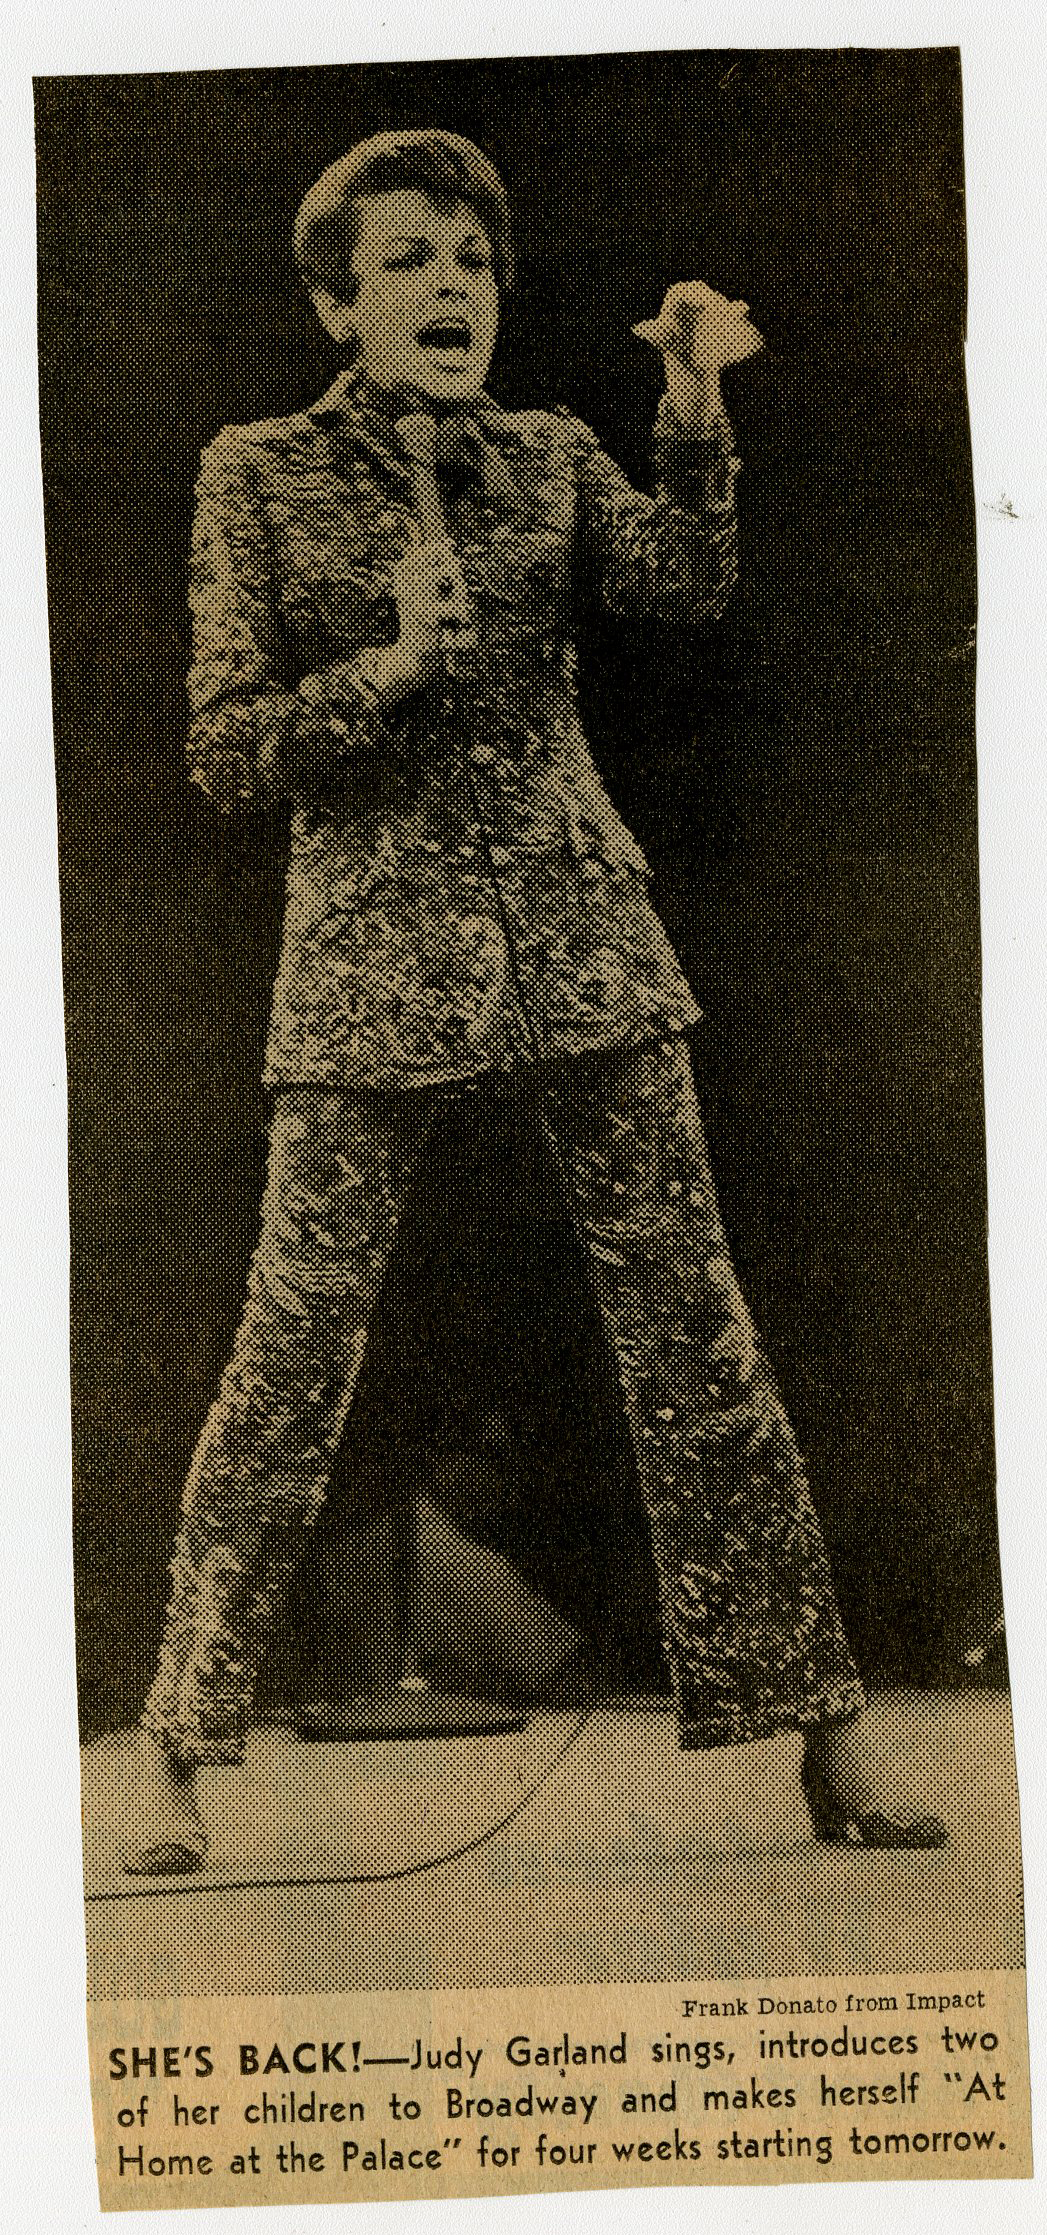 A newspaper clipping of Judy Garland, singing and wearing a suit.